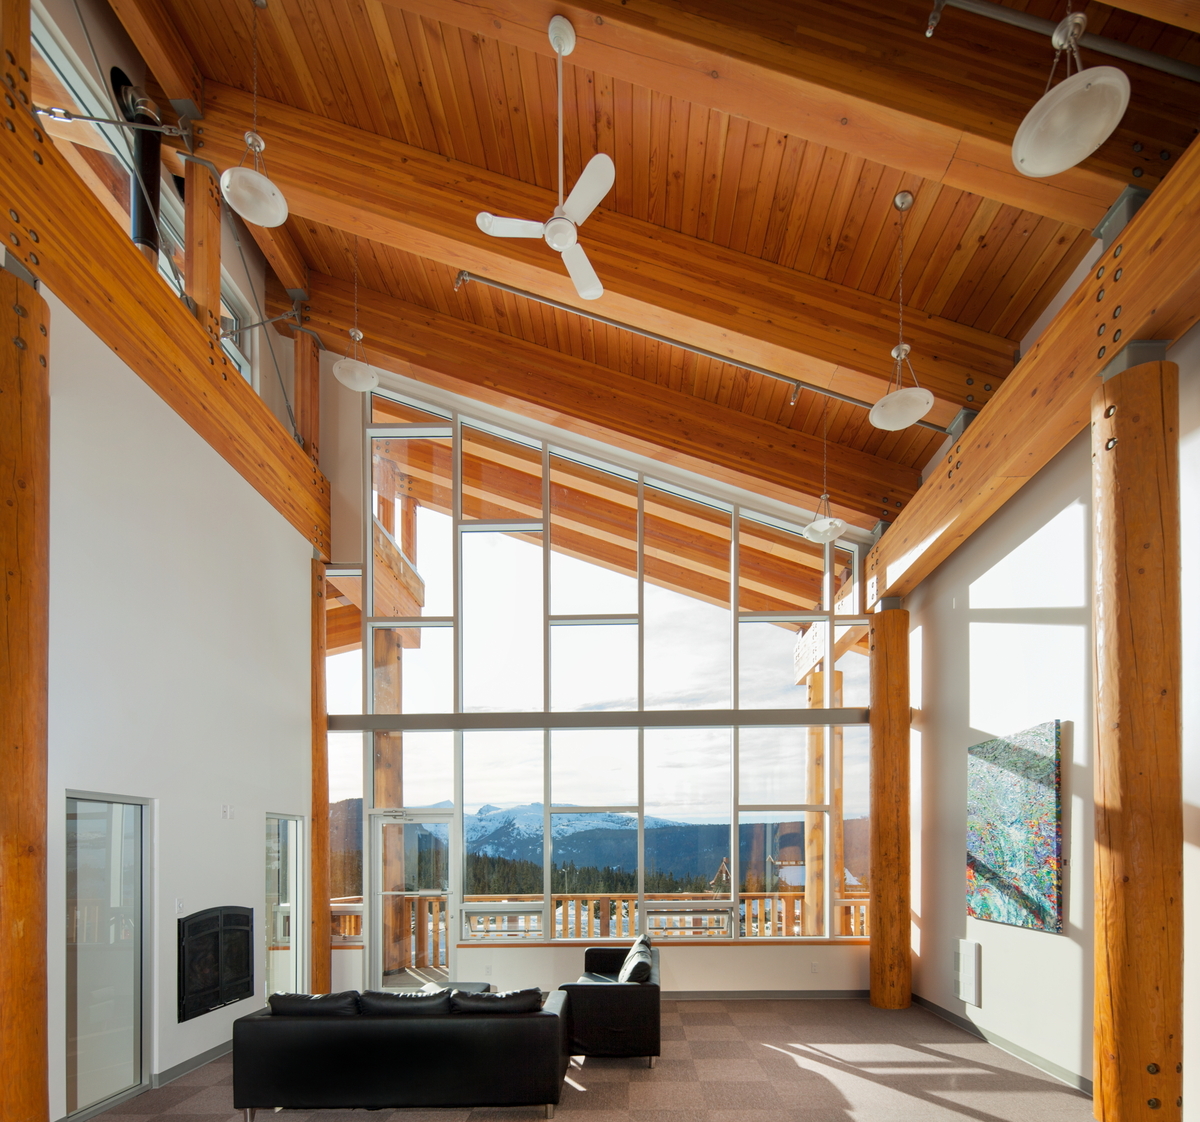 Interior sunny daytime image of the Vancouver Island Mountain Centre atrium, showing glue-laminated timber (Glulam) beams, and round solid-sawn heavy timber columns supporting a tongue and groove plank ceiling